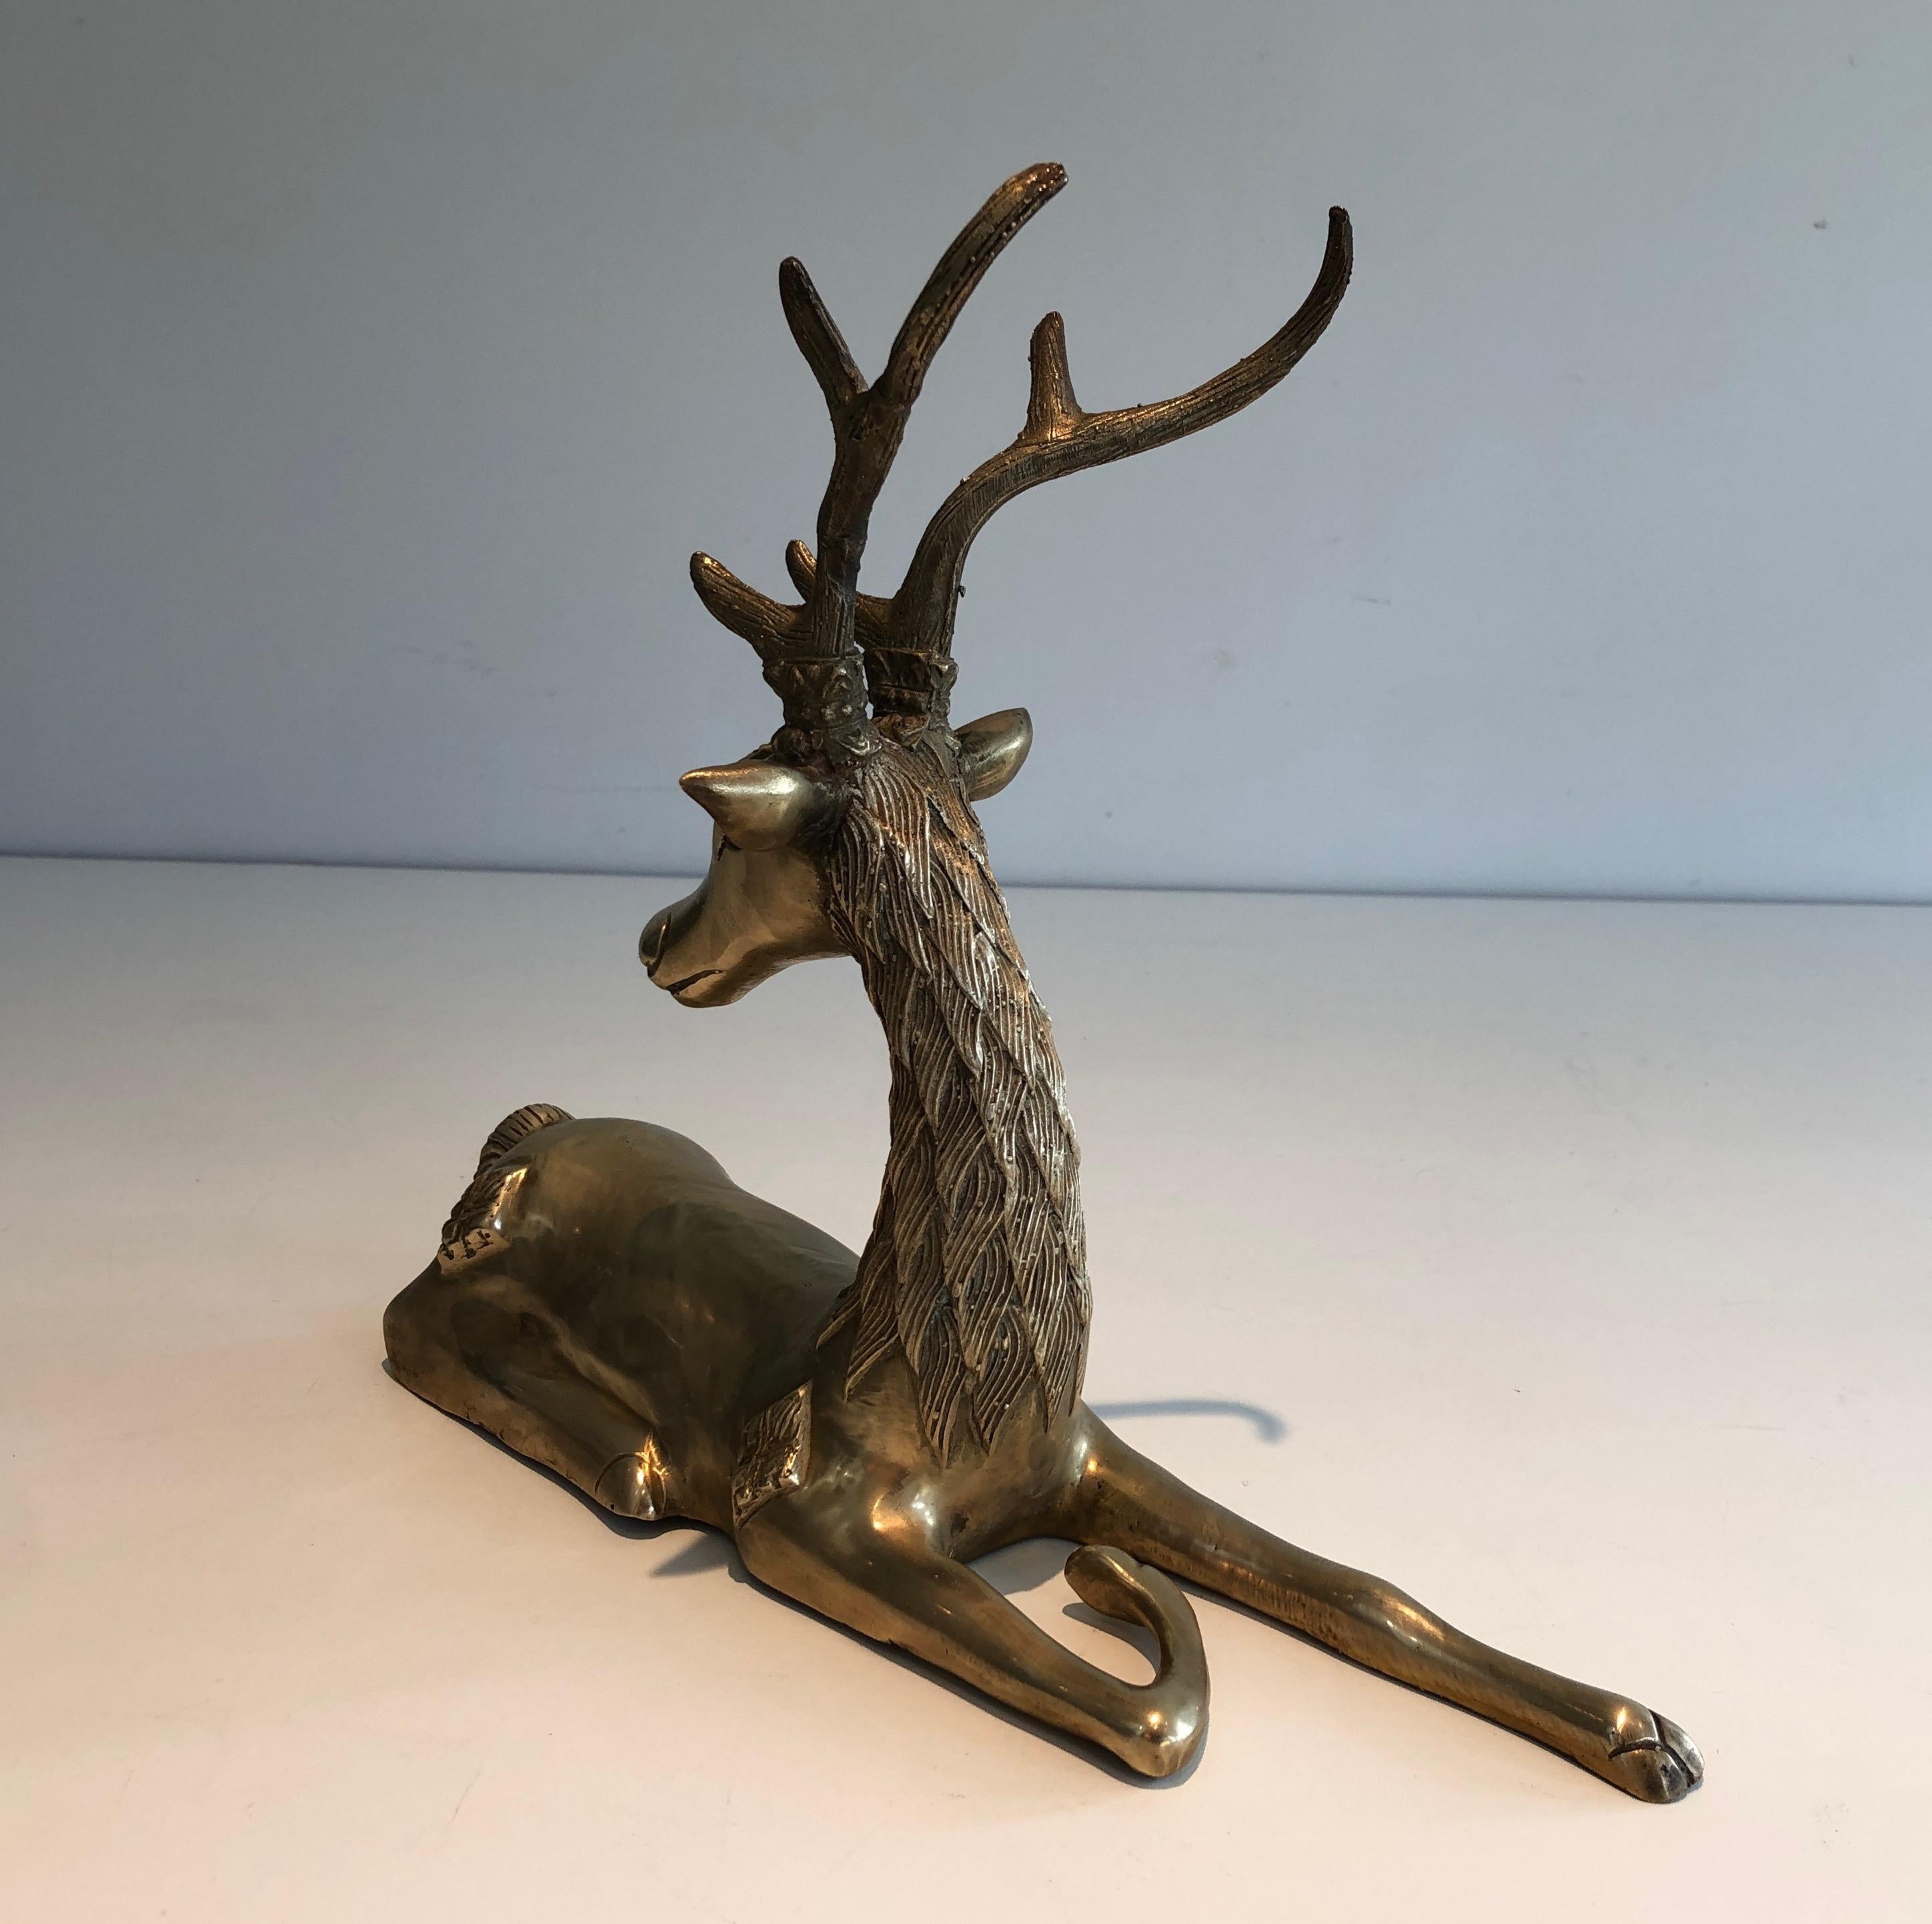 This lying deer sculpture is made of brass with shamanic inlays. This is a French work, circa 1970.